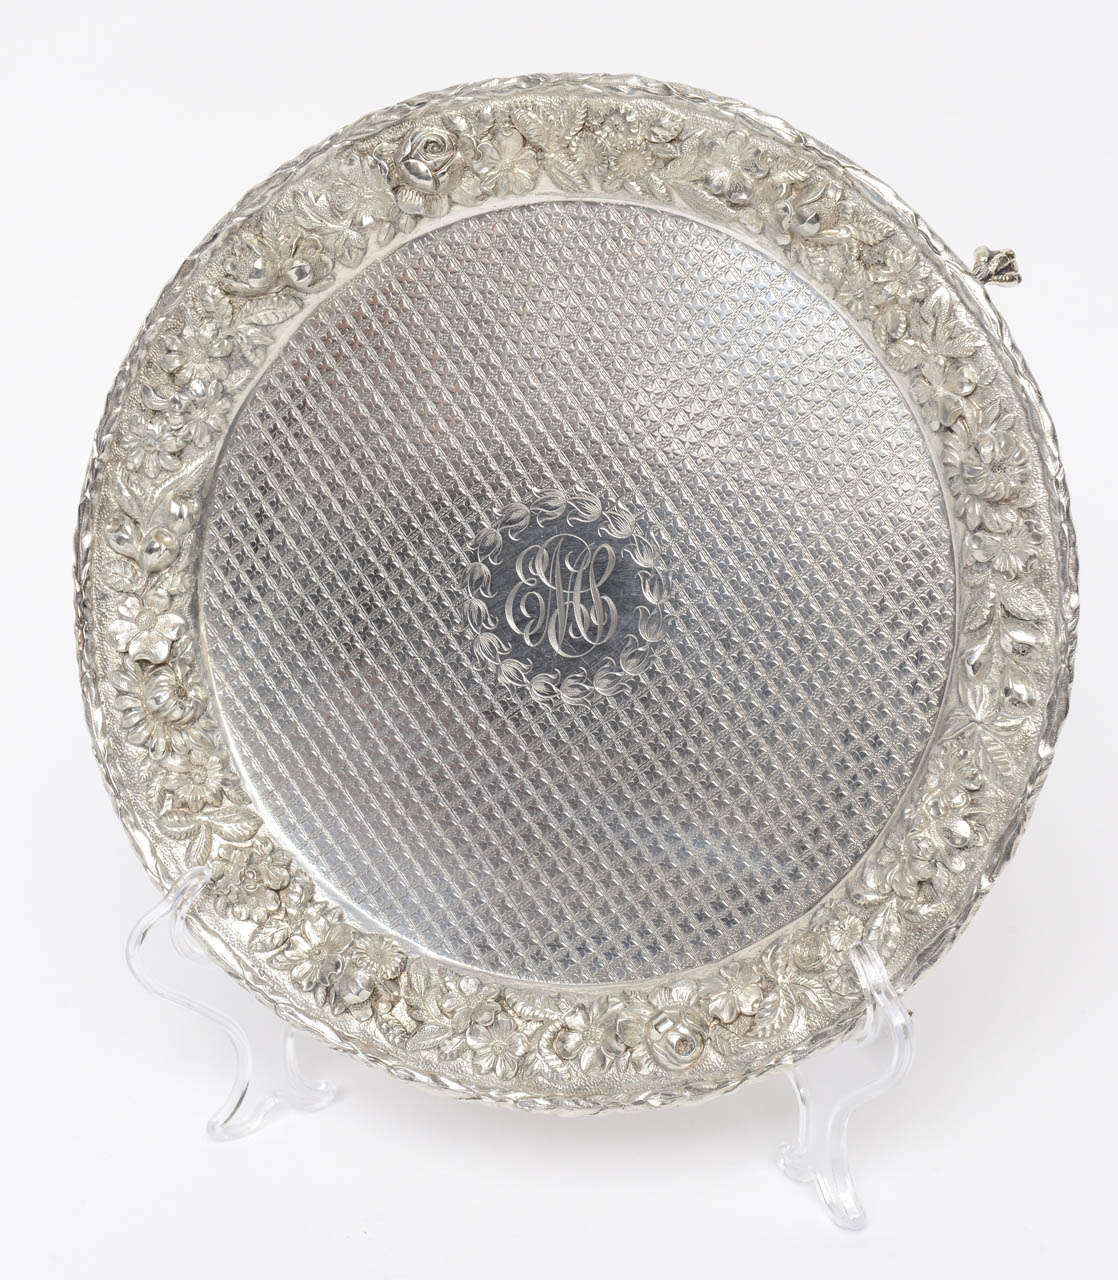 Sterling Silver Waiter/ Charger by Samuel Kirk & Son Co., Baltimore, Maryland, USA.  Circular tray having ornate repousse floral border & textured surface, raised on claw & ball feet

Originally $ 3,200.00

CHECK OUR INVENTORY FOR ADDITIONAL